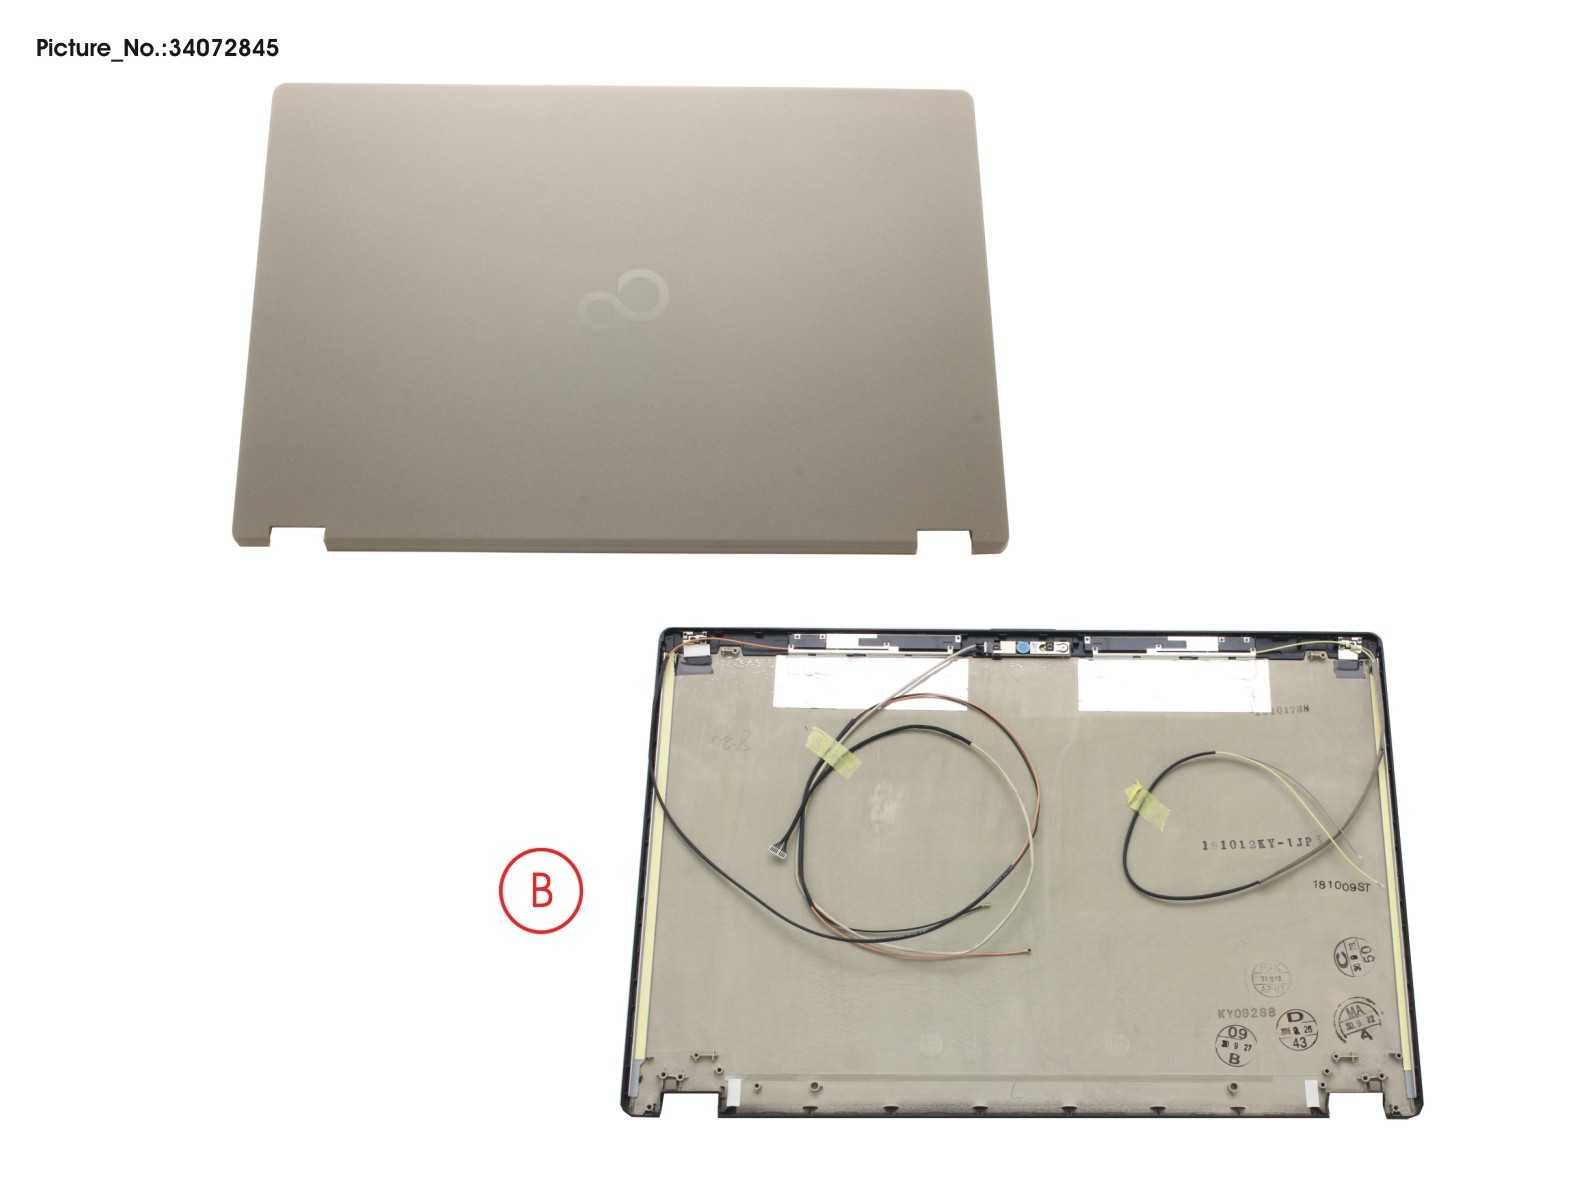 LCD BACK COVER ASSY(W/ CAM,MIC FOR WWAN)